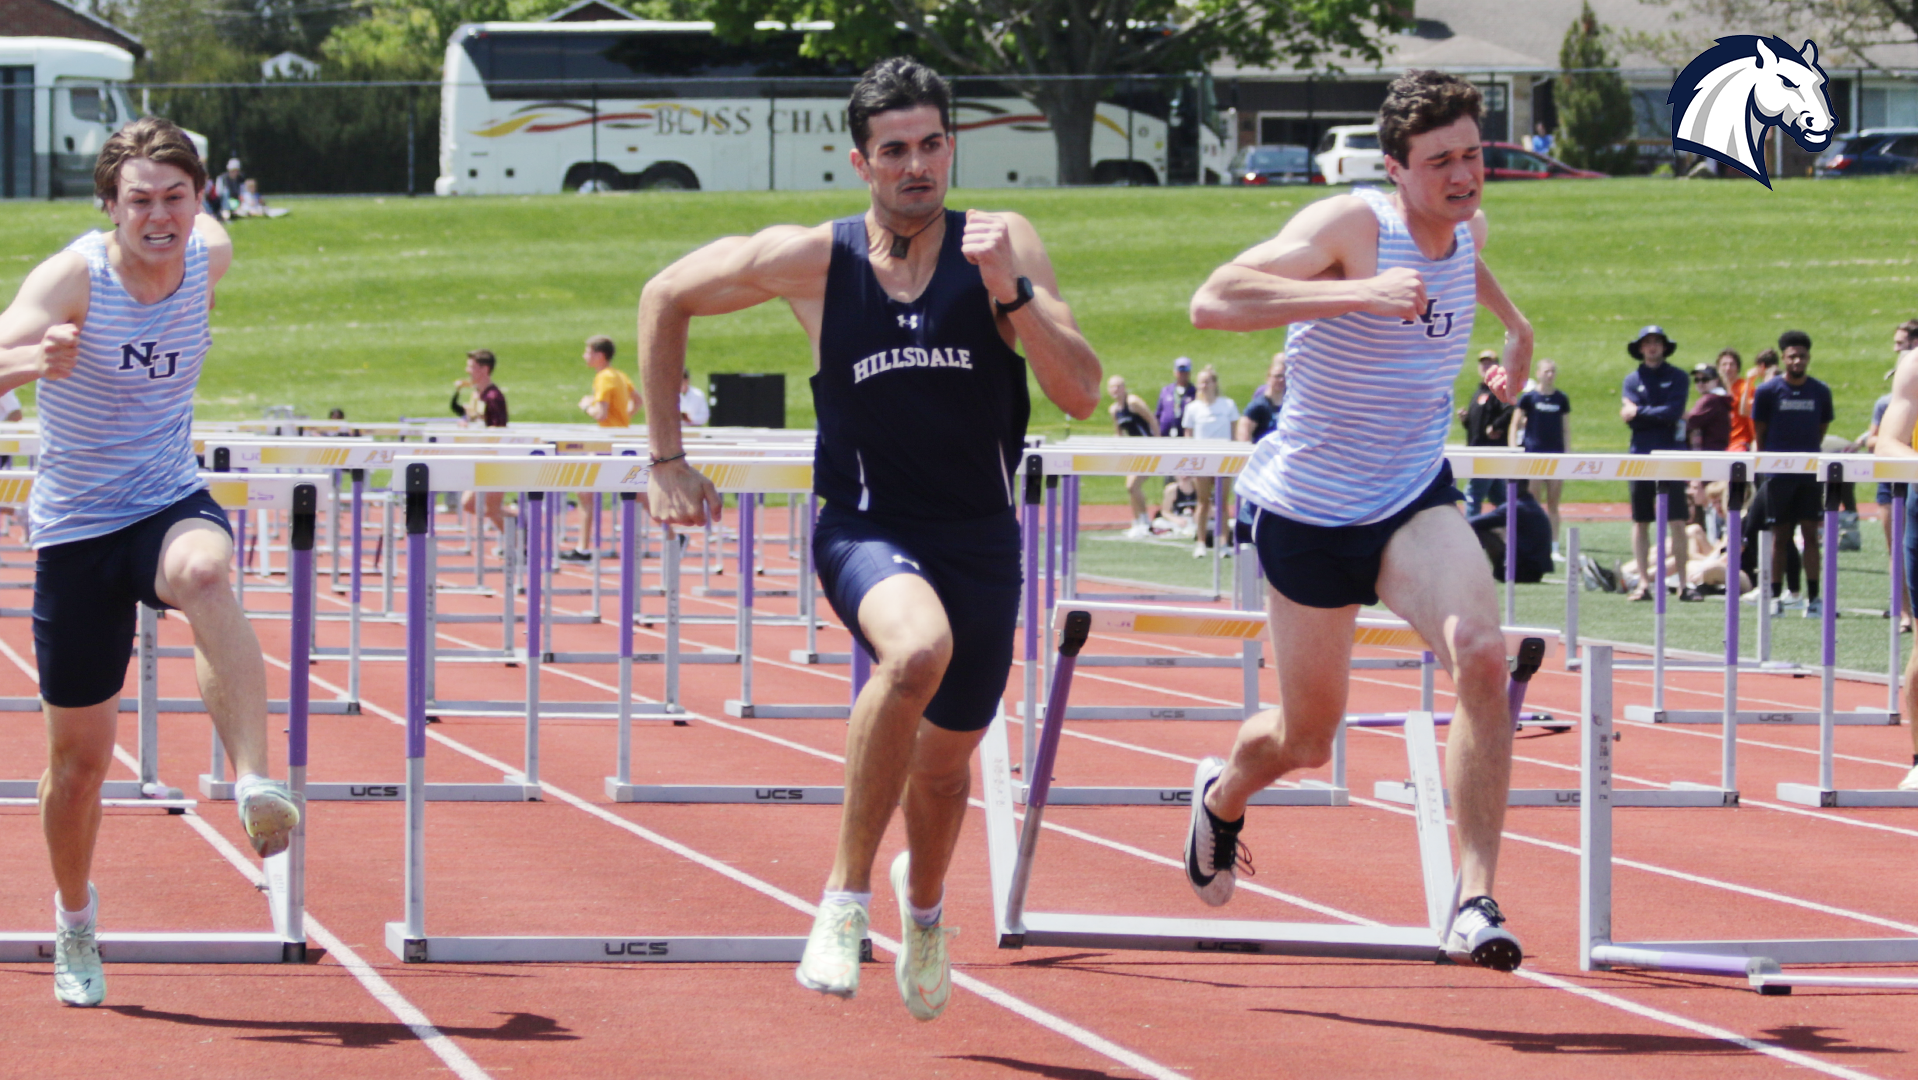 Charger men post several personal bests to wrap up G-MAC Outdoor Championships